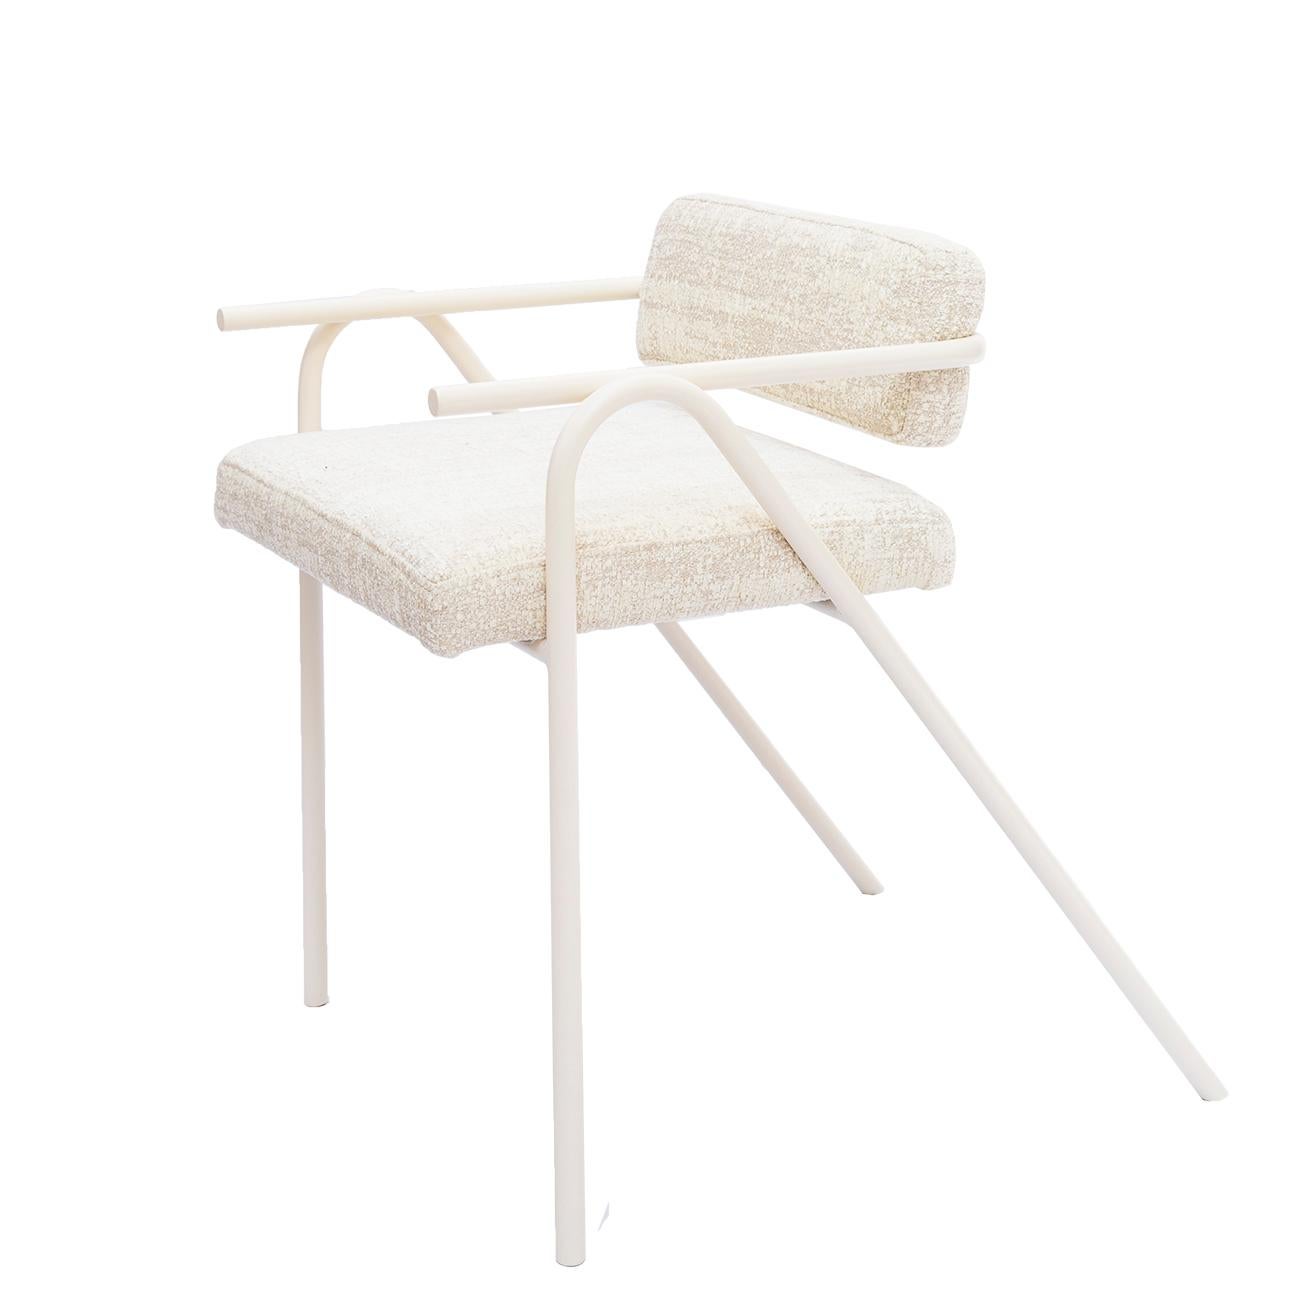 Object 102 Chair by NG Design
Dimensions: W 53 x D 69 x H 71 cm
Materials: Powder Coated Steel, Fabric Rustic White

Also Available: All of objects available in different materials and colors on demand.

The Object 102 Chair is a classic with a